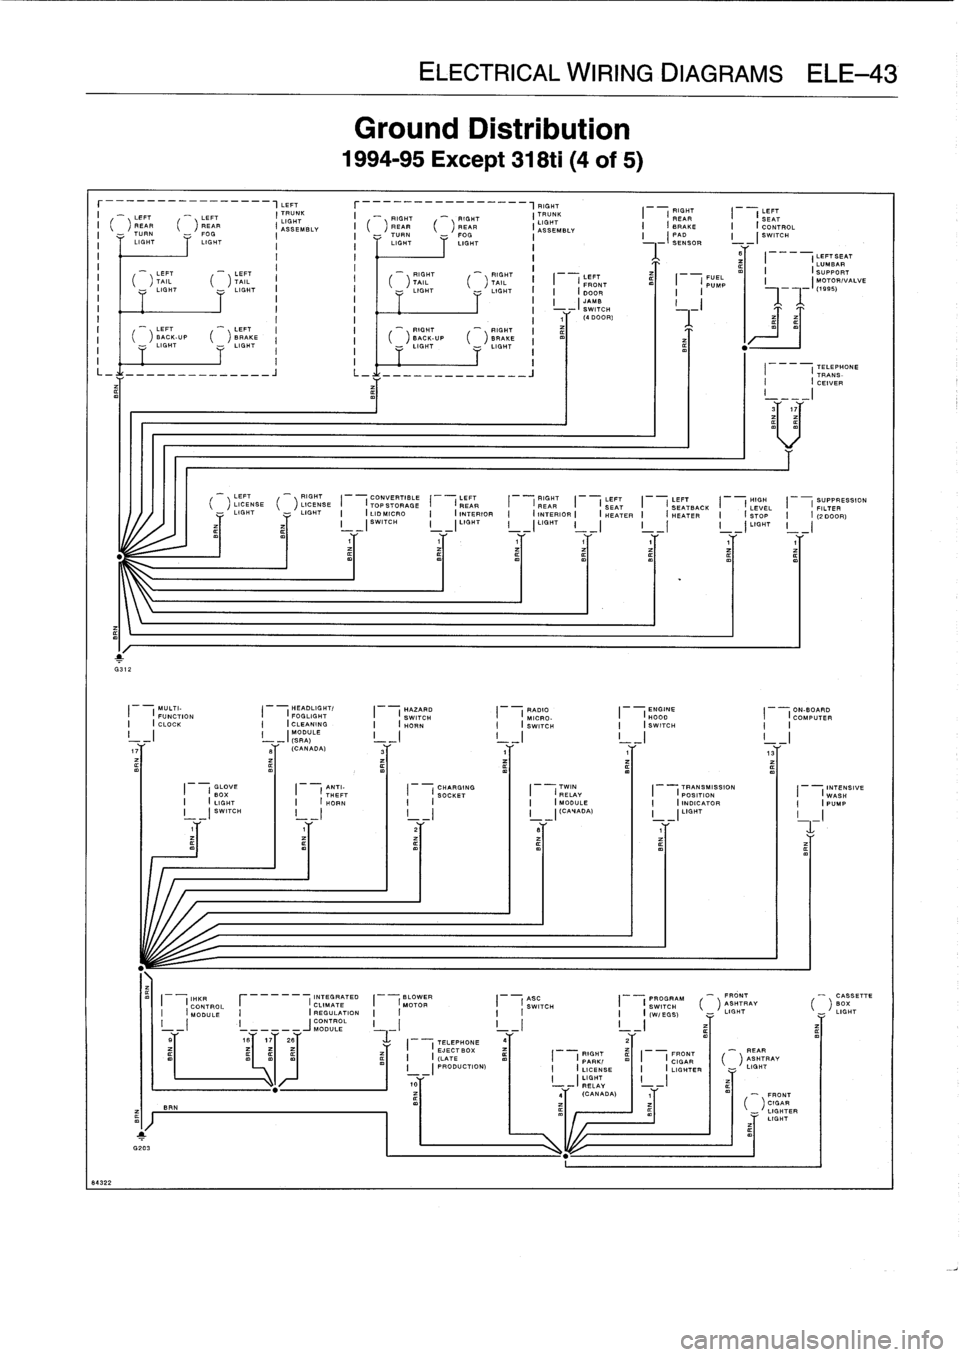 BMW 318i 1997 E36 Owners Guide 
ELECTRICAL
WIRING
DIAGRAMSELE-43

r----------_-__--,LEFT

	

r---__-------~_--,FIGHT
I

	

-

	

RIGHT

	

LIT
LEFT

	

"-

	

LEFT

	

I
IGHT
K

	

I

	

_

	

RIGHT

	



	

RIGHT

	

I
TRUNK
SEM